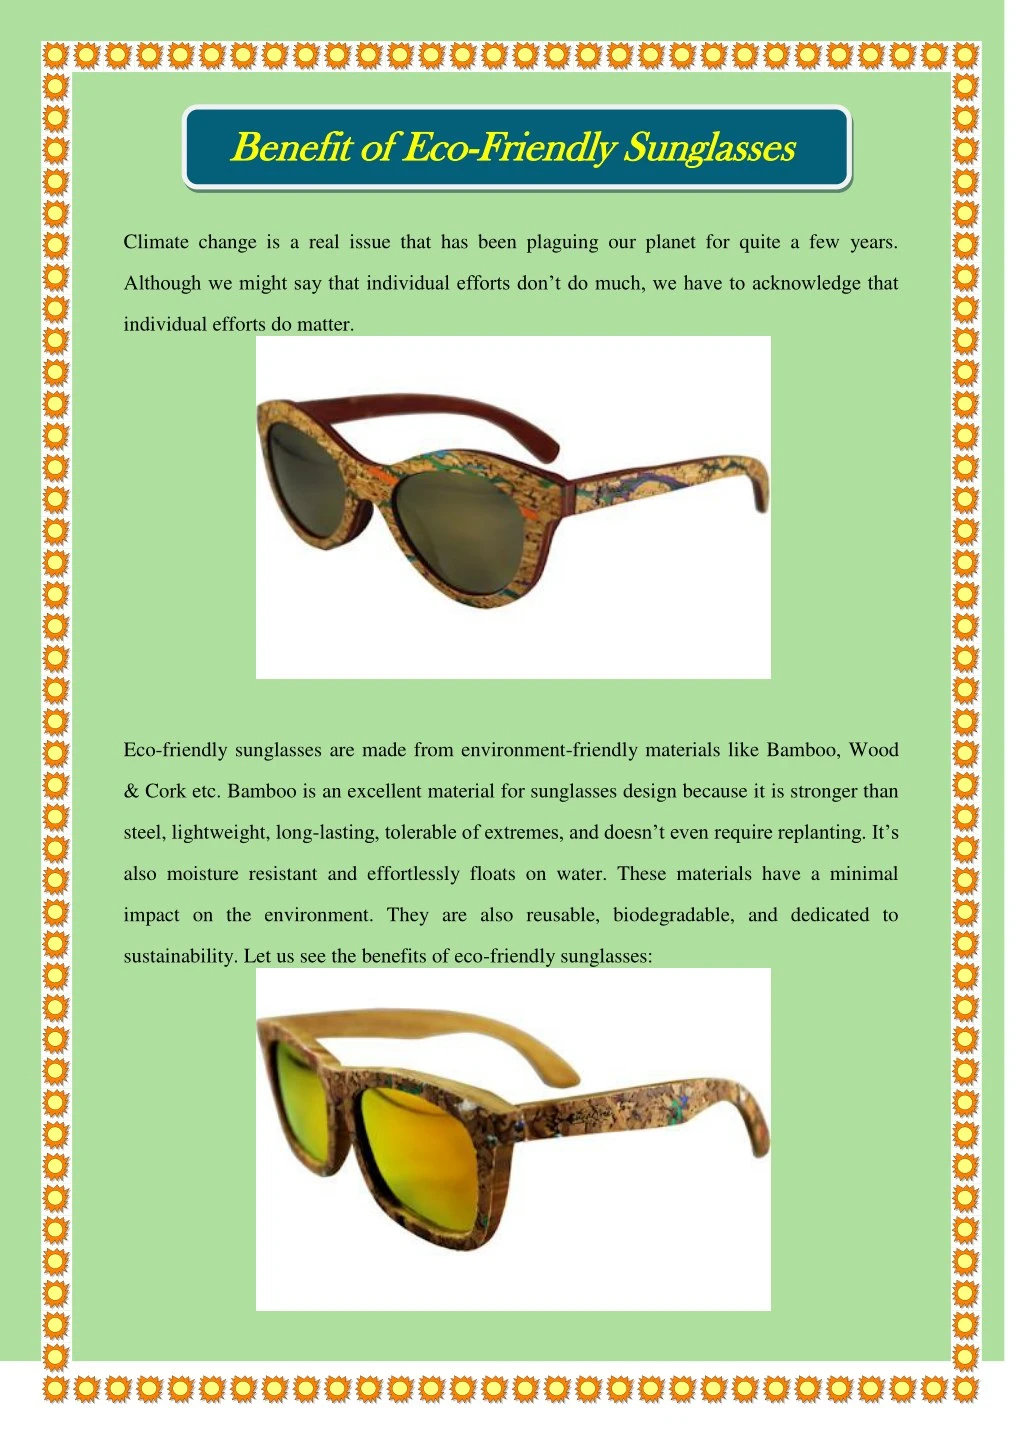 benefit of eco benefit of eco friendly sunglasses